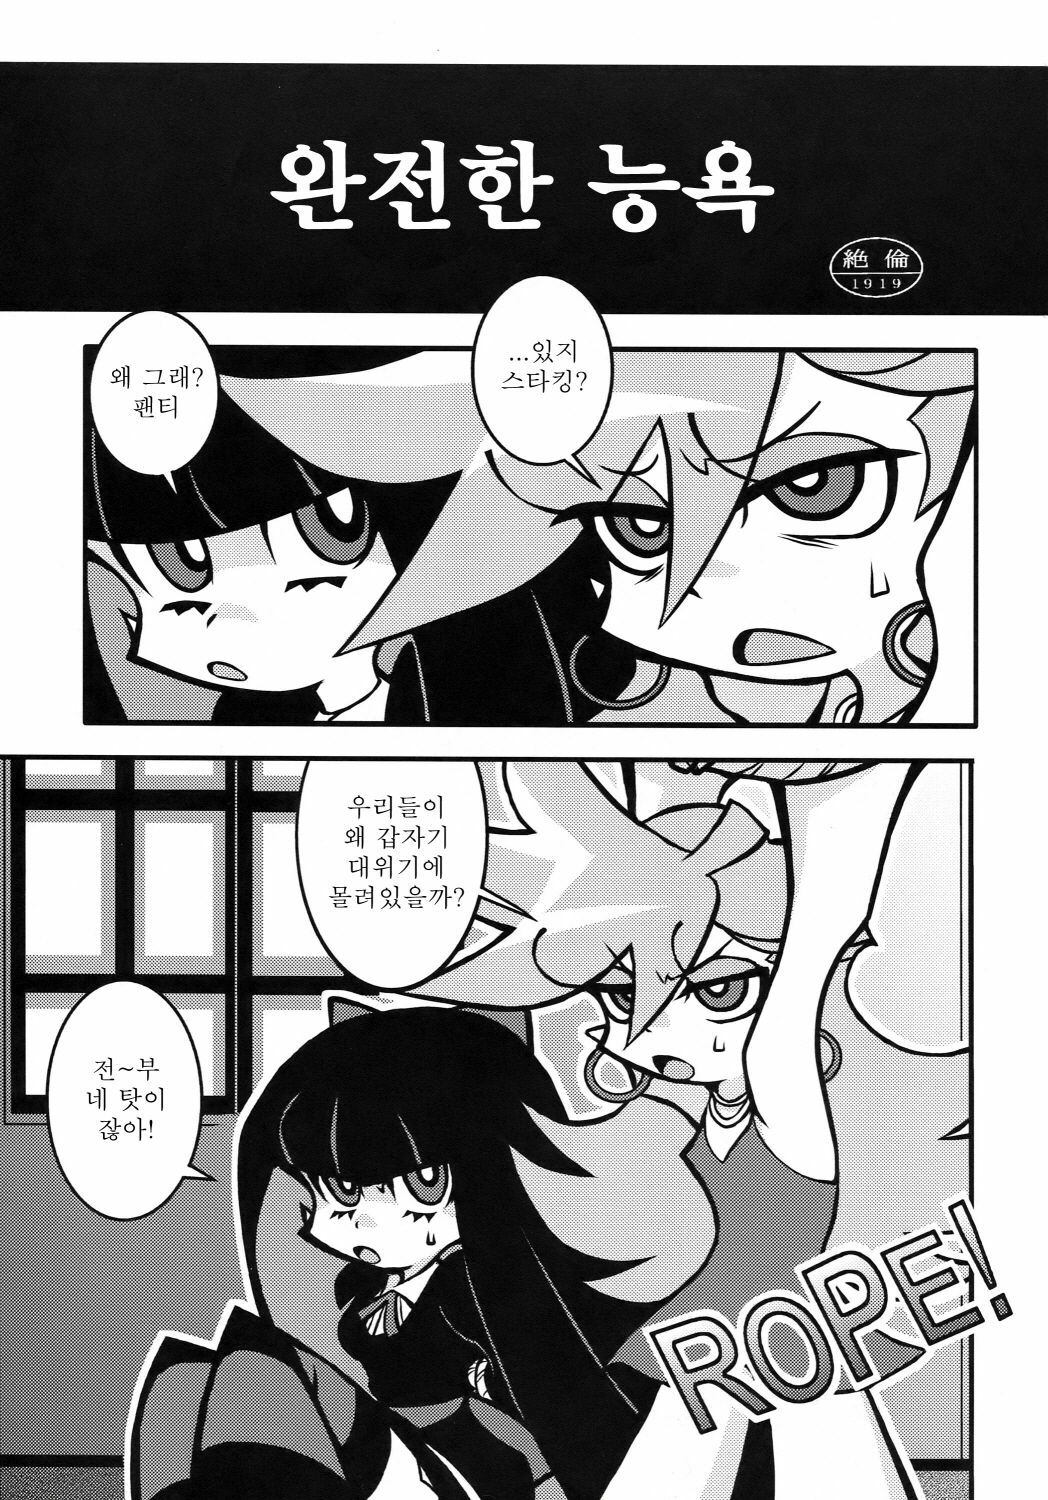 (C79) [1787 (Macaroni and Cheese)] R18 (Panty & Stocking with Garterbelt) [Korean] [백두산] page 3 full